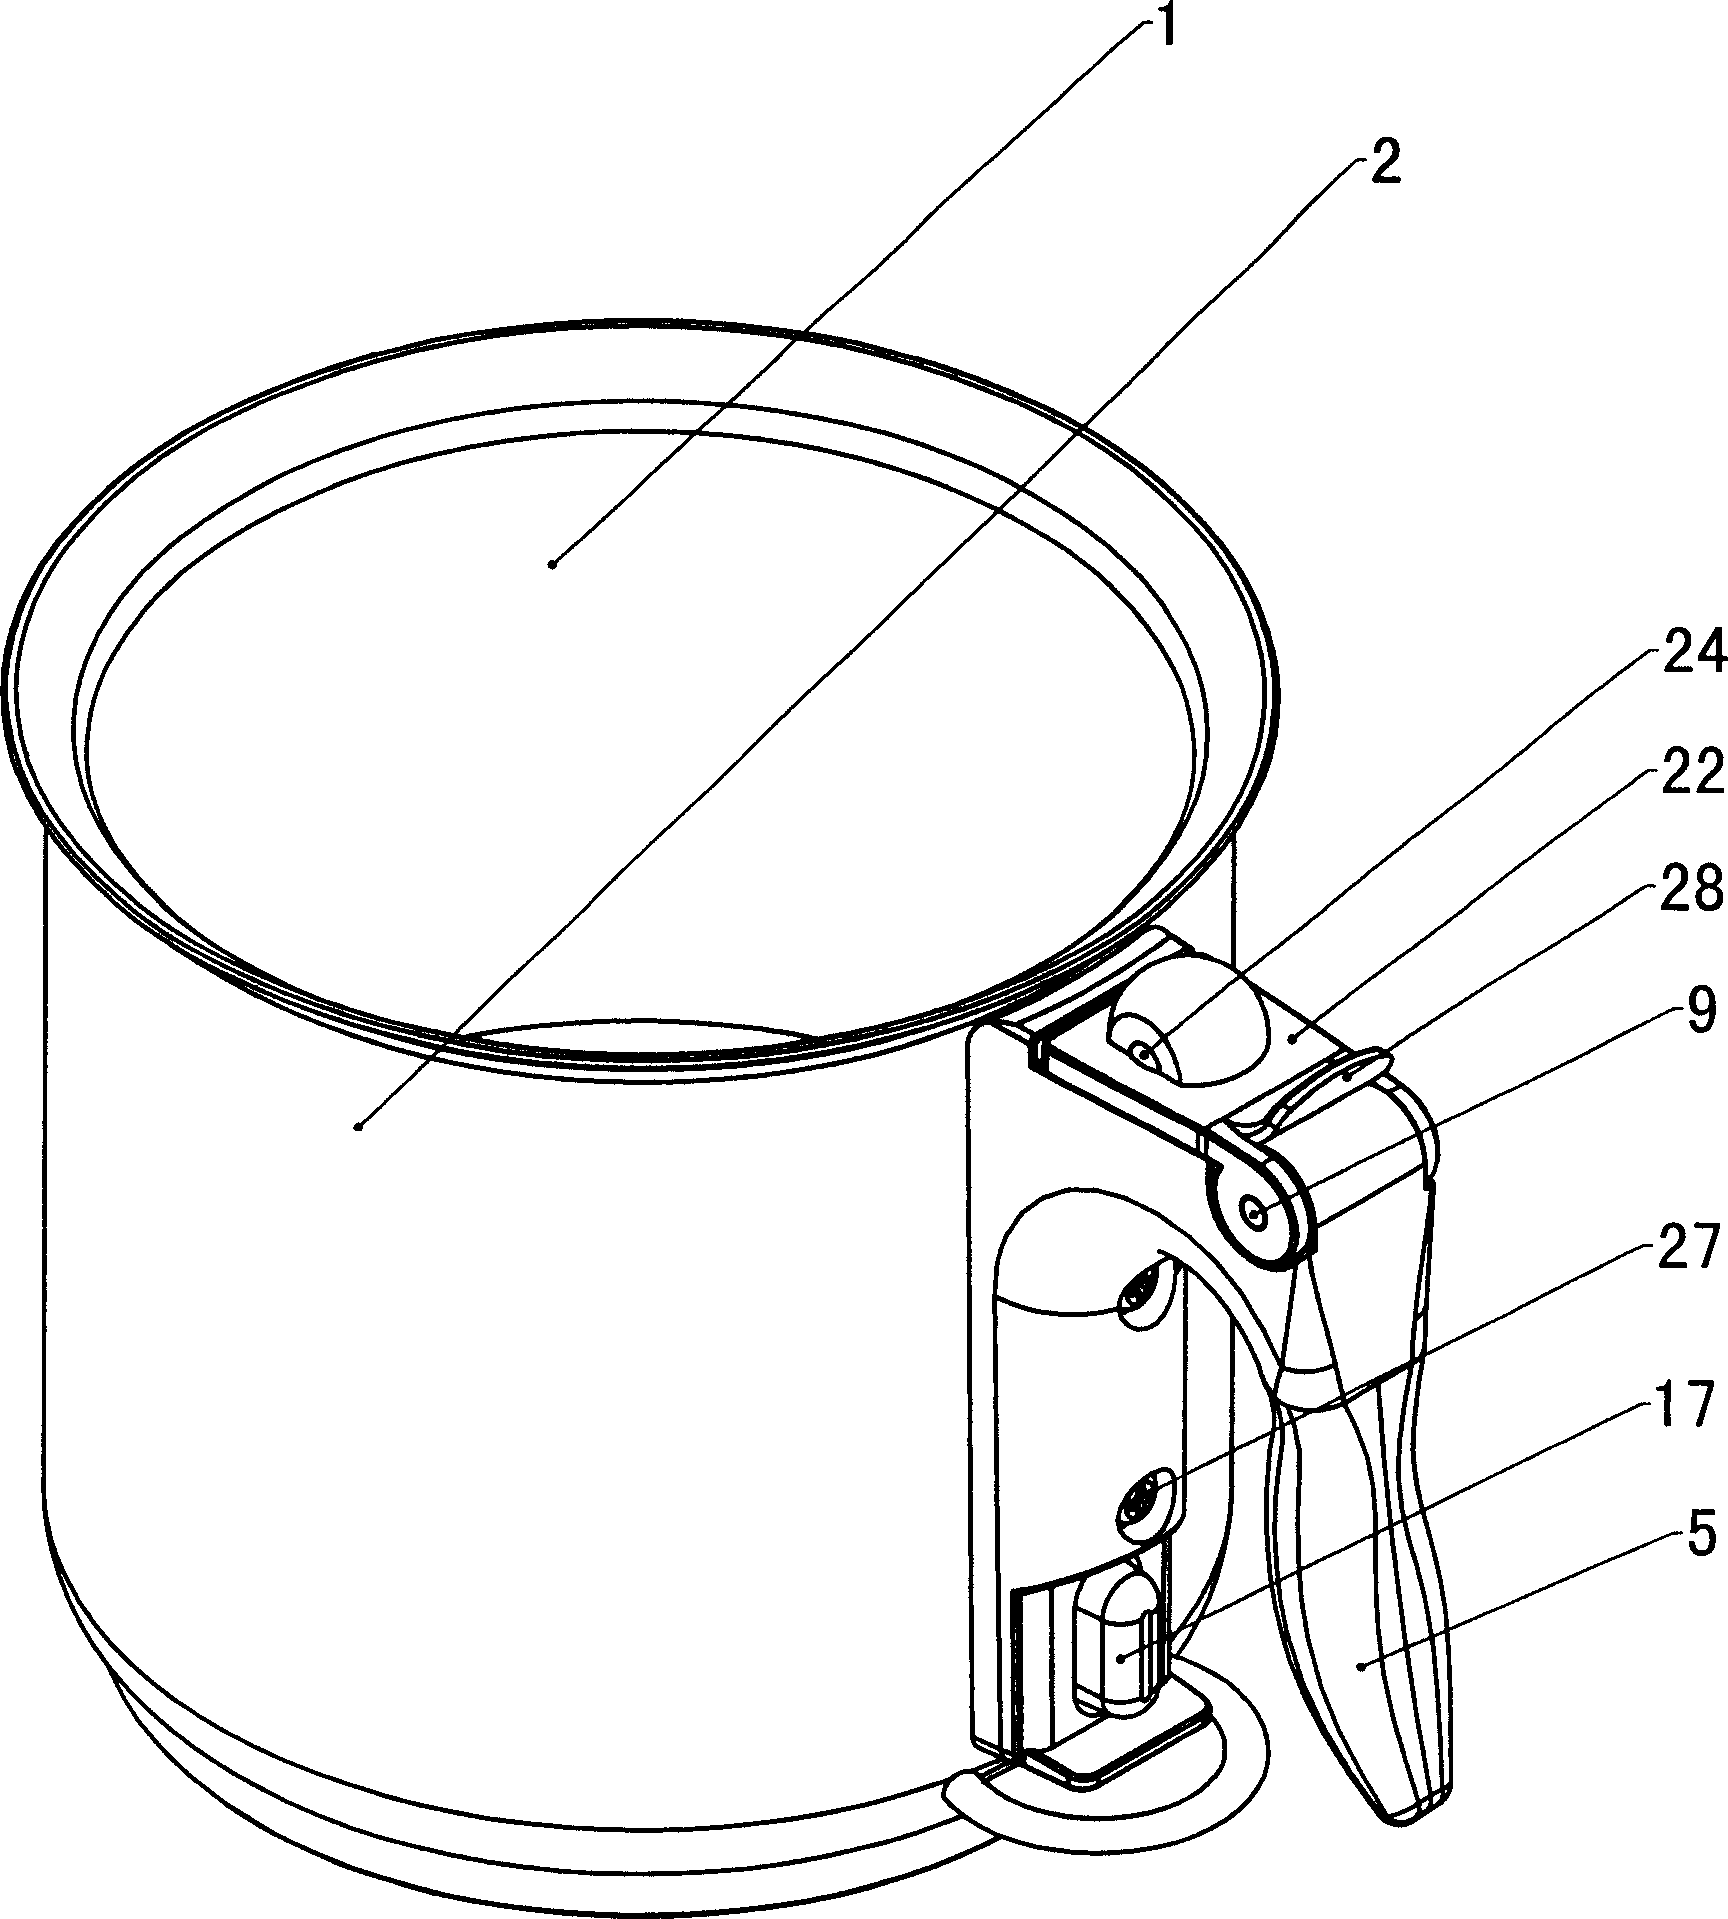 Double-layered stewpot with whistle